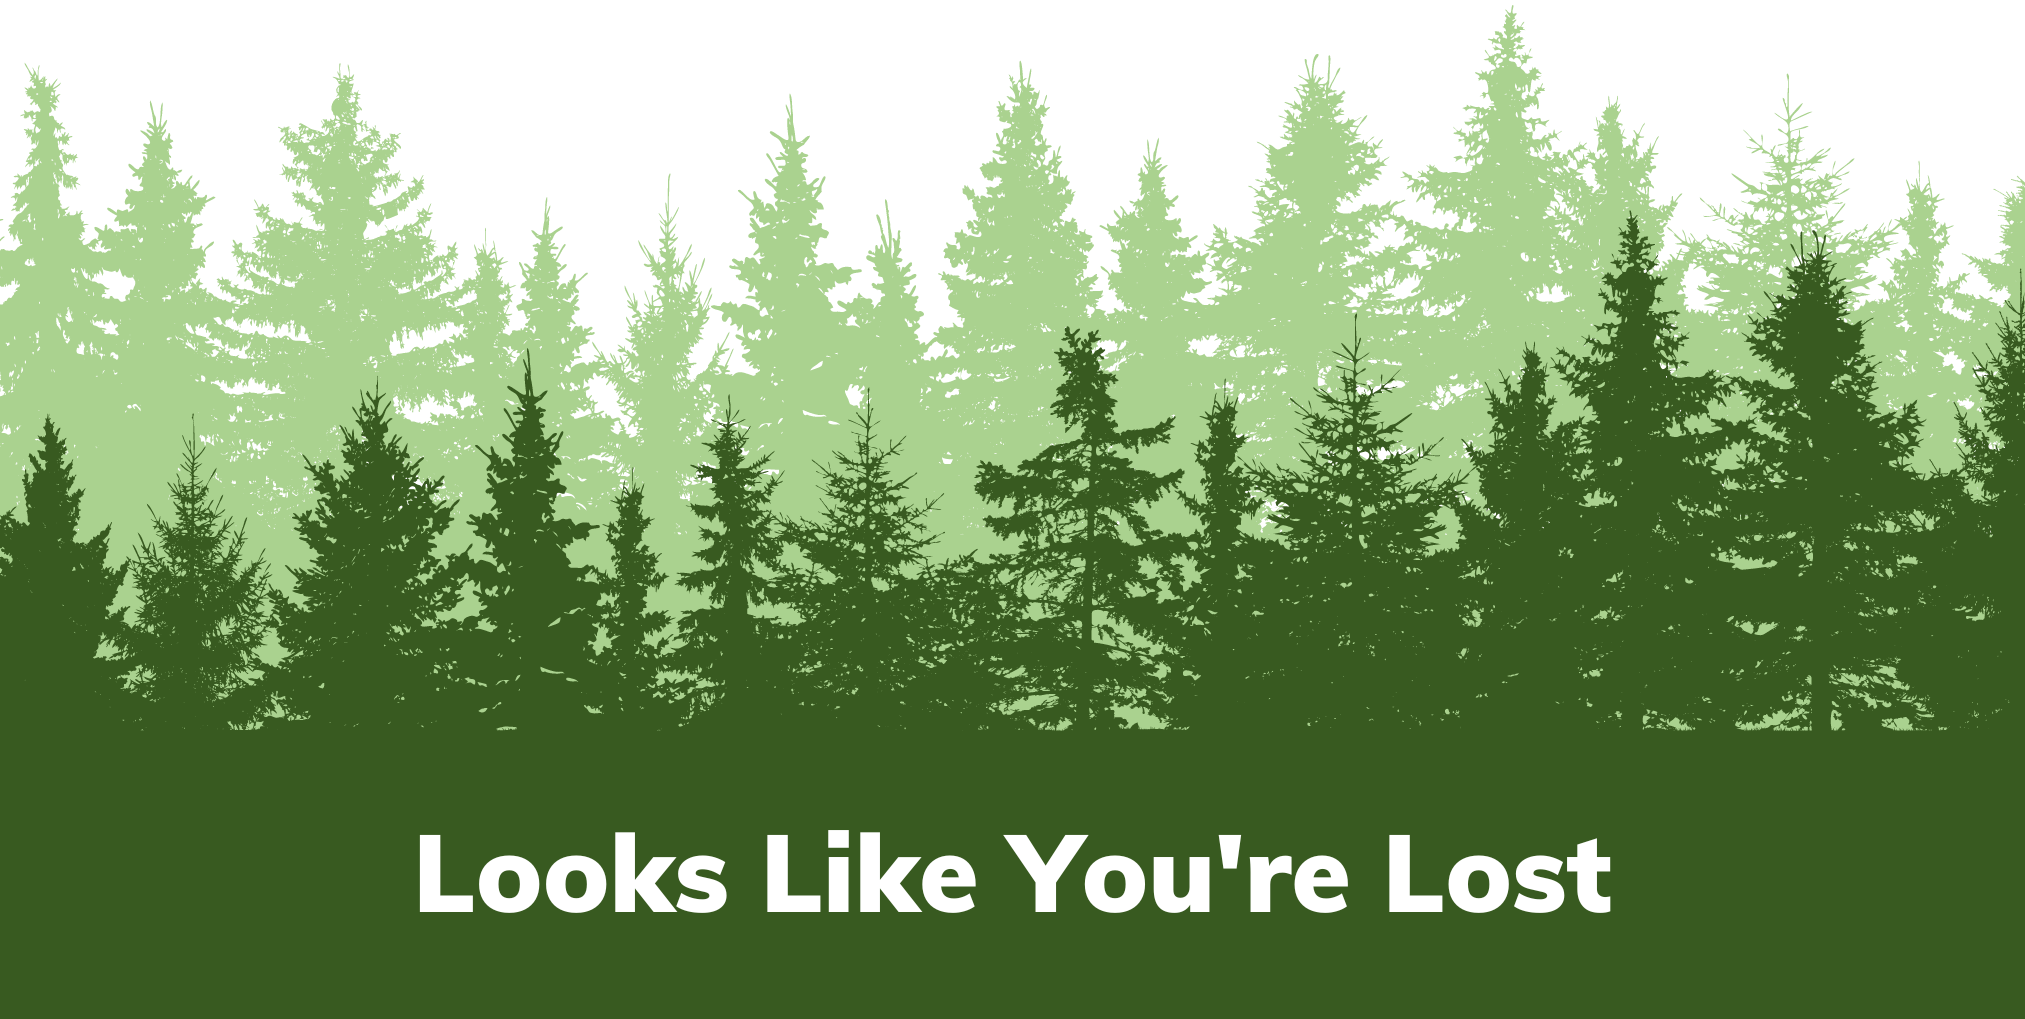 Image of green trees with white text that reads "Looks like you're lost"